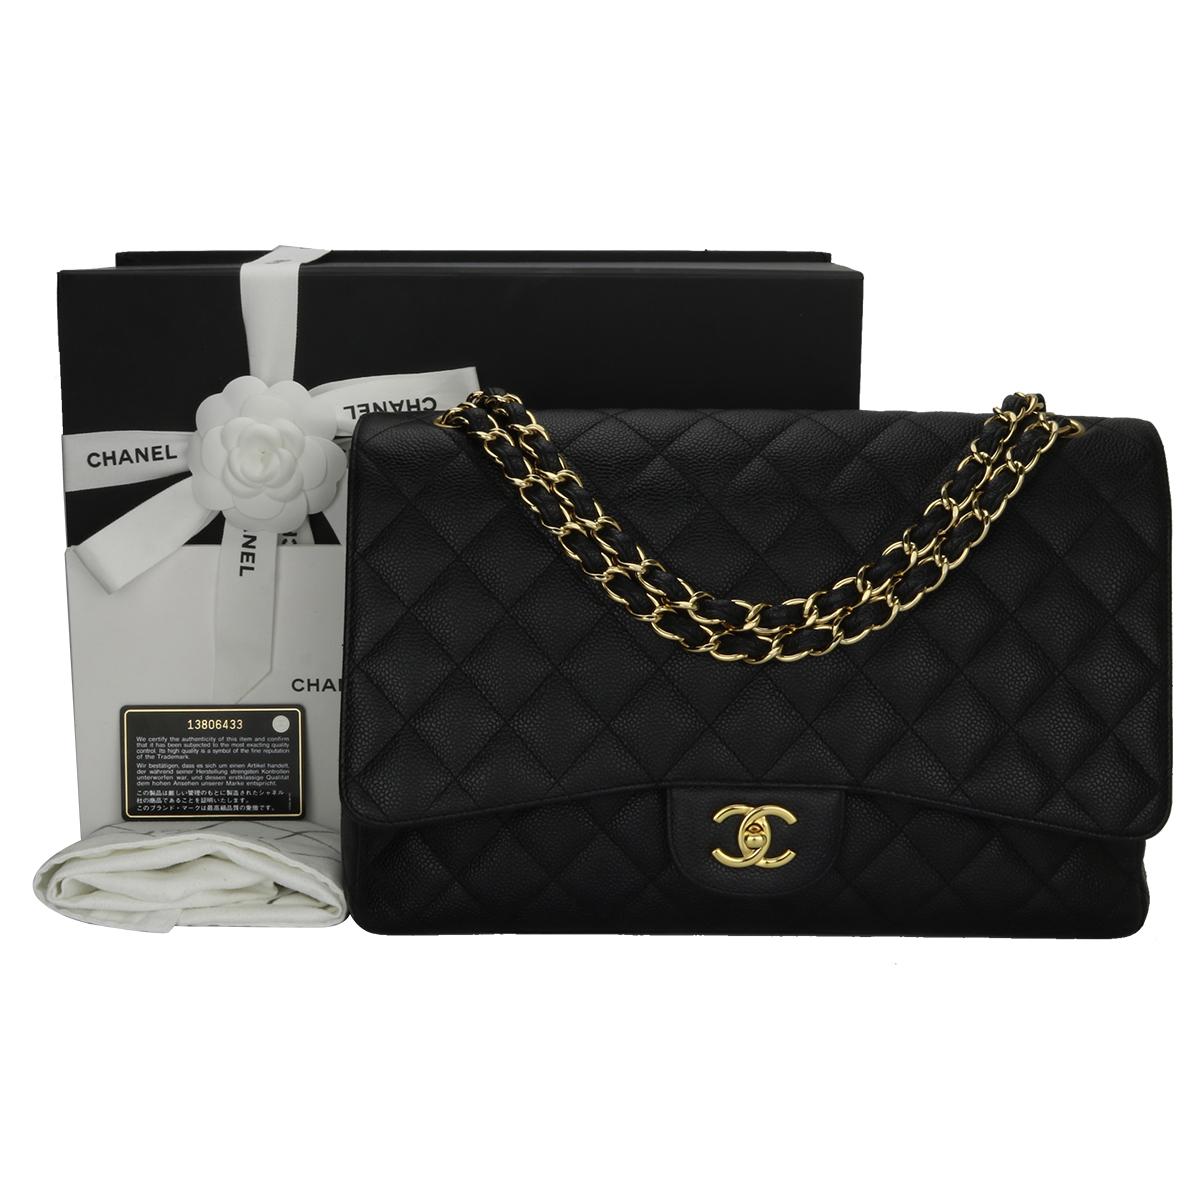 Authentic CHANEL Black Caviar Maxi Single Flap with Gold Hardware 2009.

This stunning bag is in a mint condition, the bag still holds its original shape and the hardware is still very shiny. Leather still smells fresh as if new.

Exterior